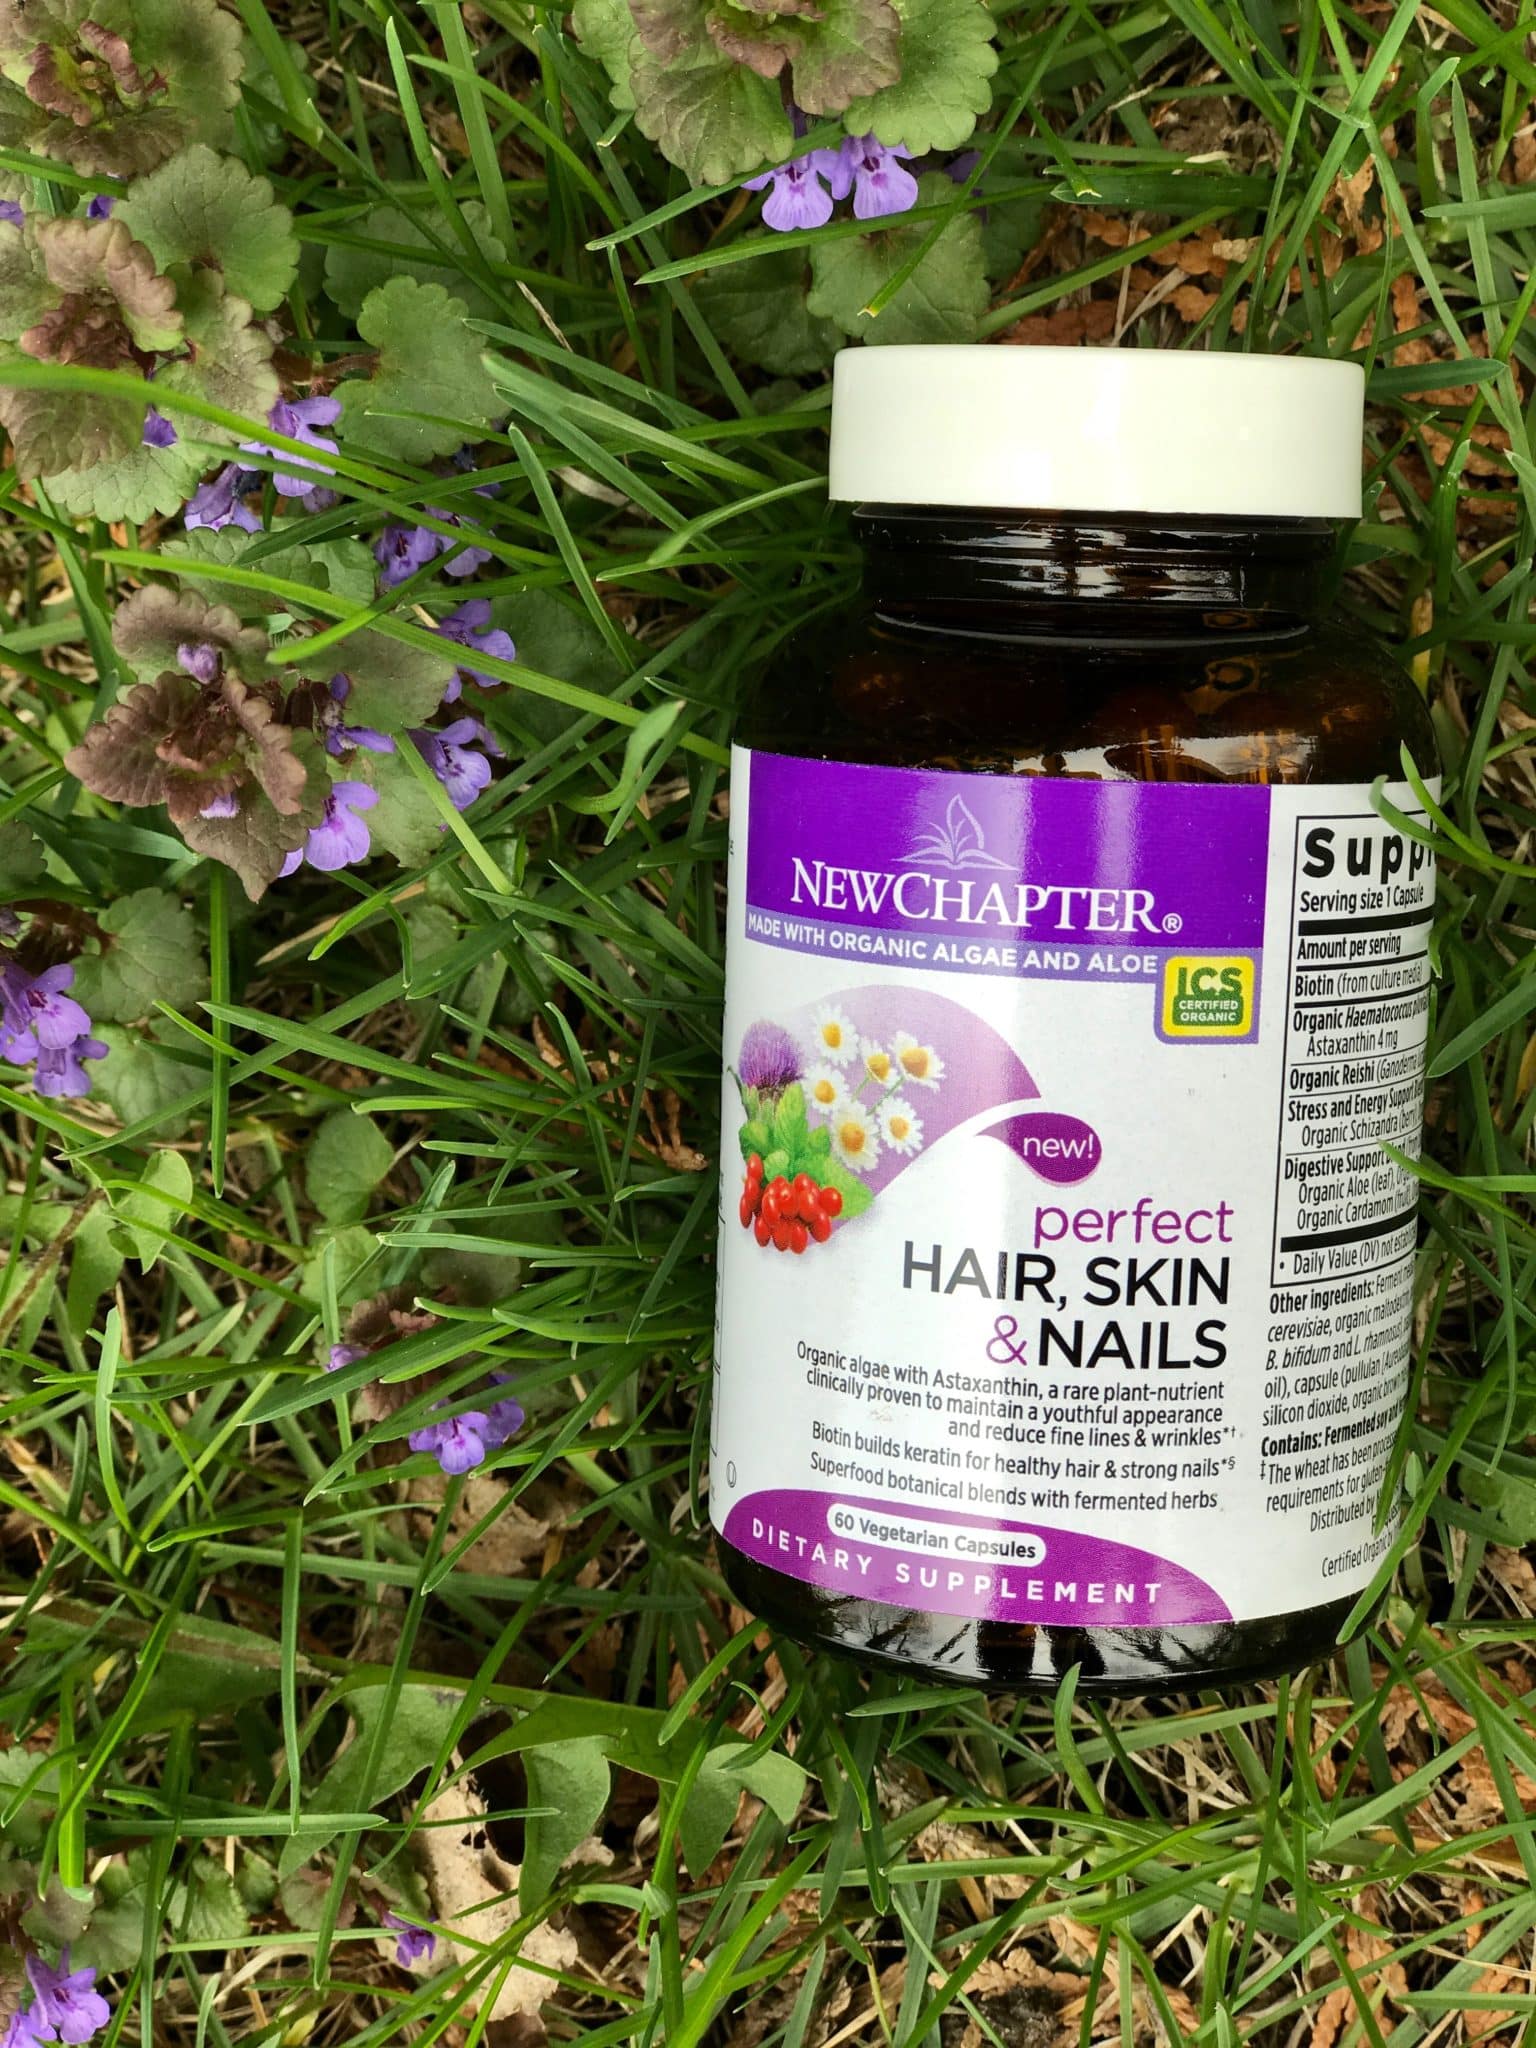 Hair supplement for the summer